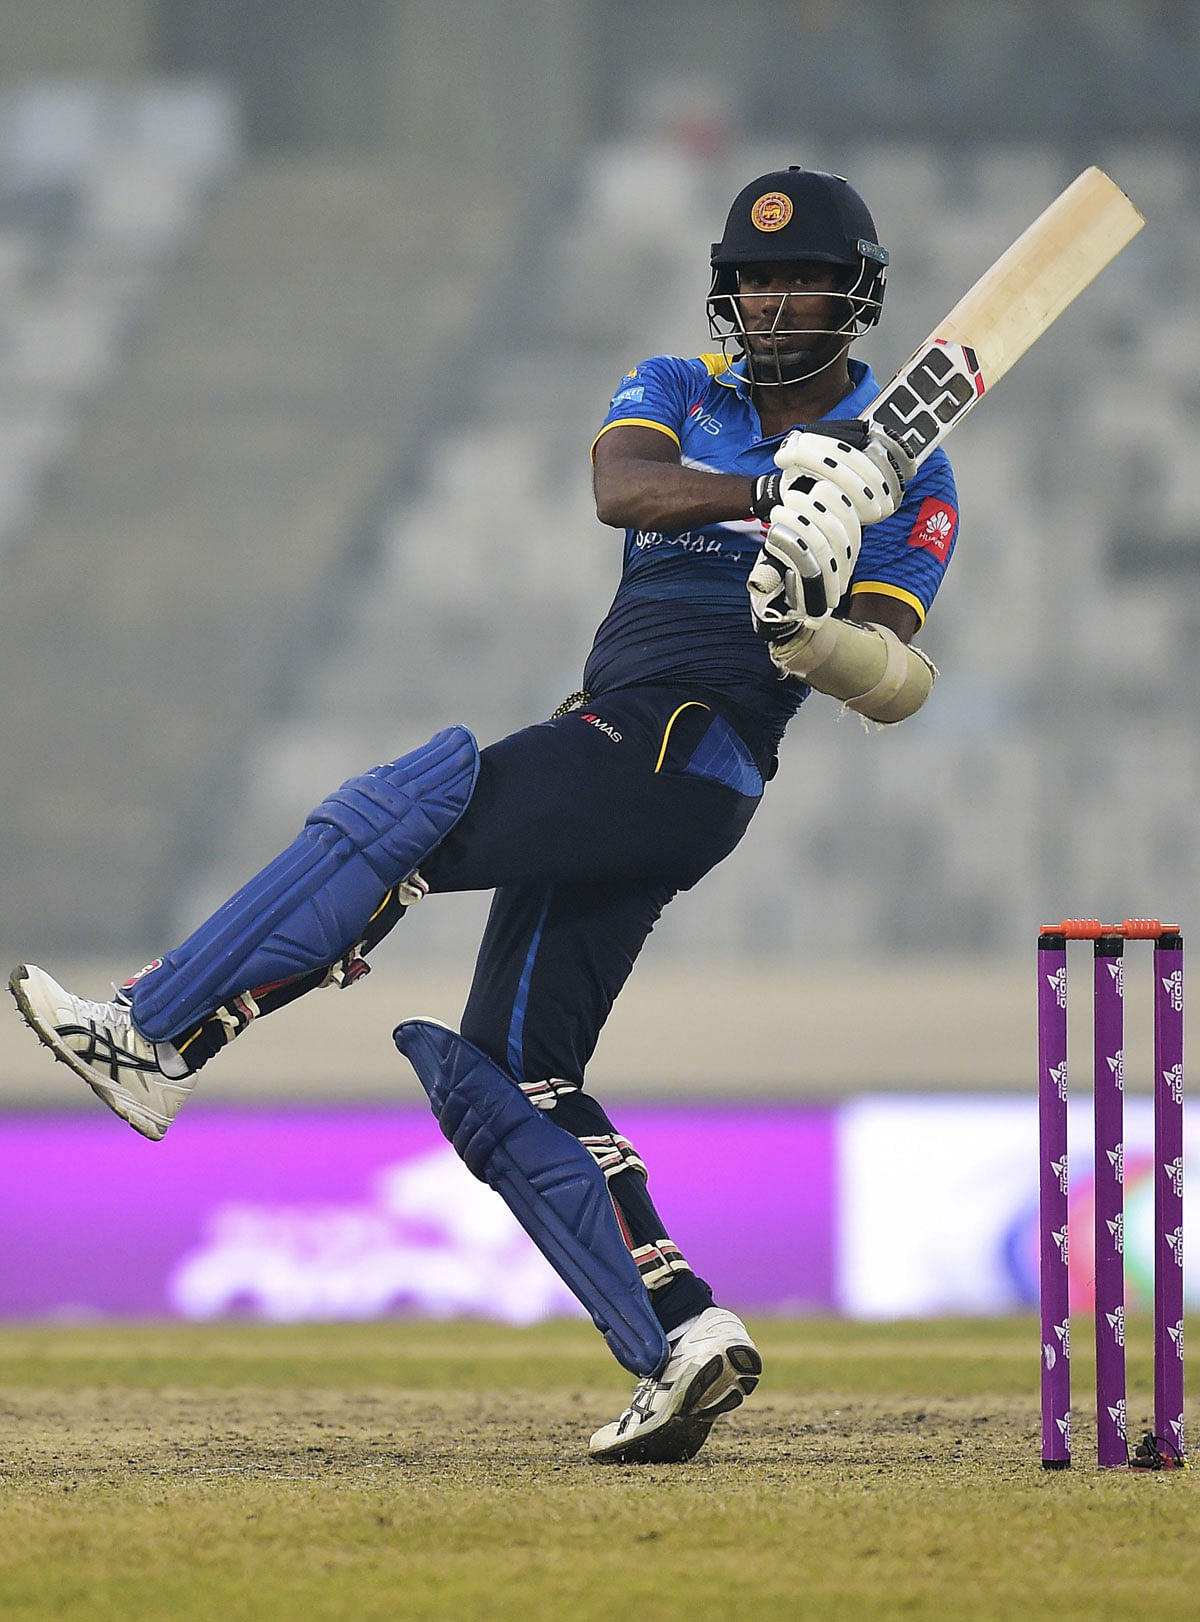 This file photo taken on 17 January, 2018 shows Sri Lanka cricket captain Angelo Mathews playing a shot during the second One Day International (ODI) cricket match of the Tri-Nations Series between Sri Lanka and Zimbabwe at the Sher-e-Bangla National Cricket Stadium in Dhaka. Photo: AFP